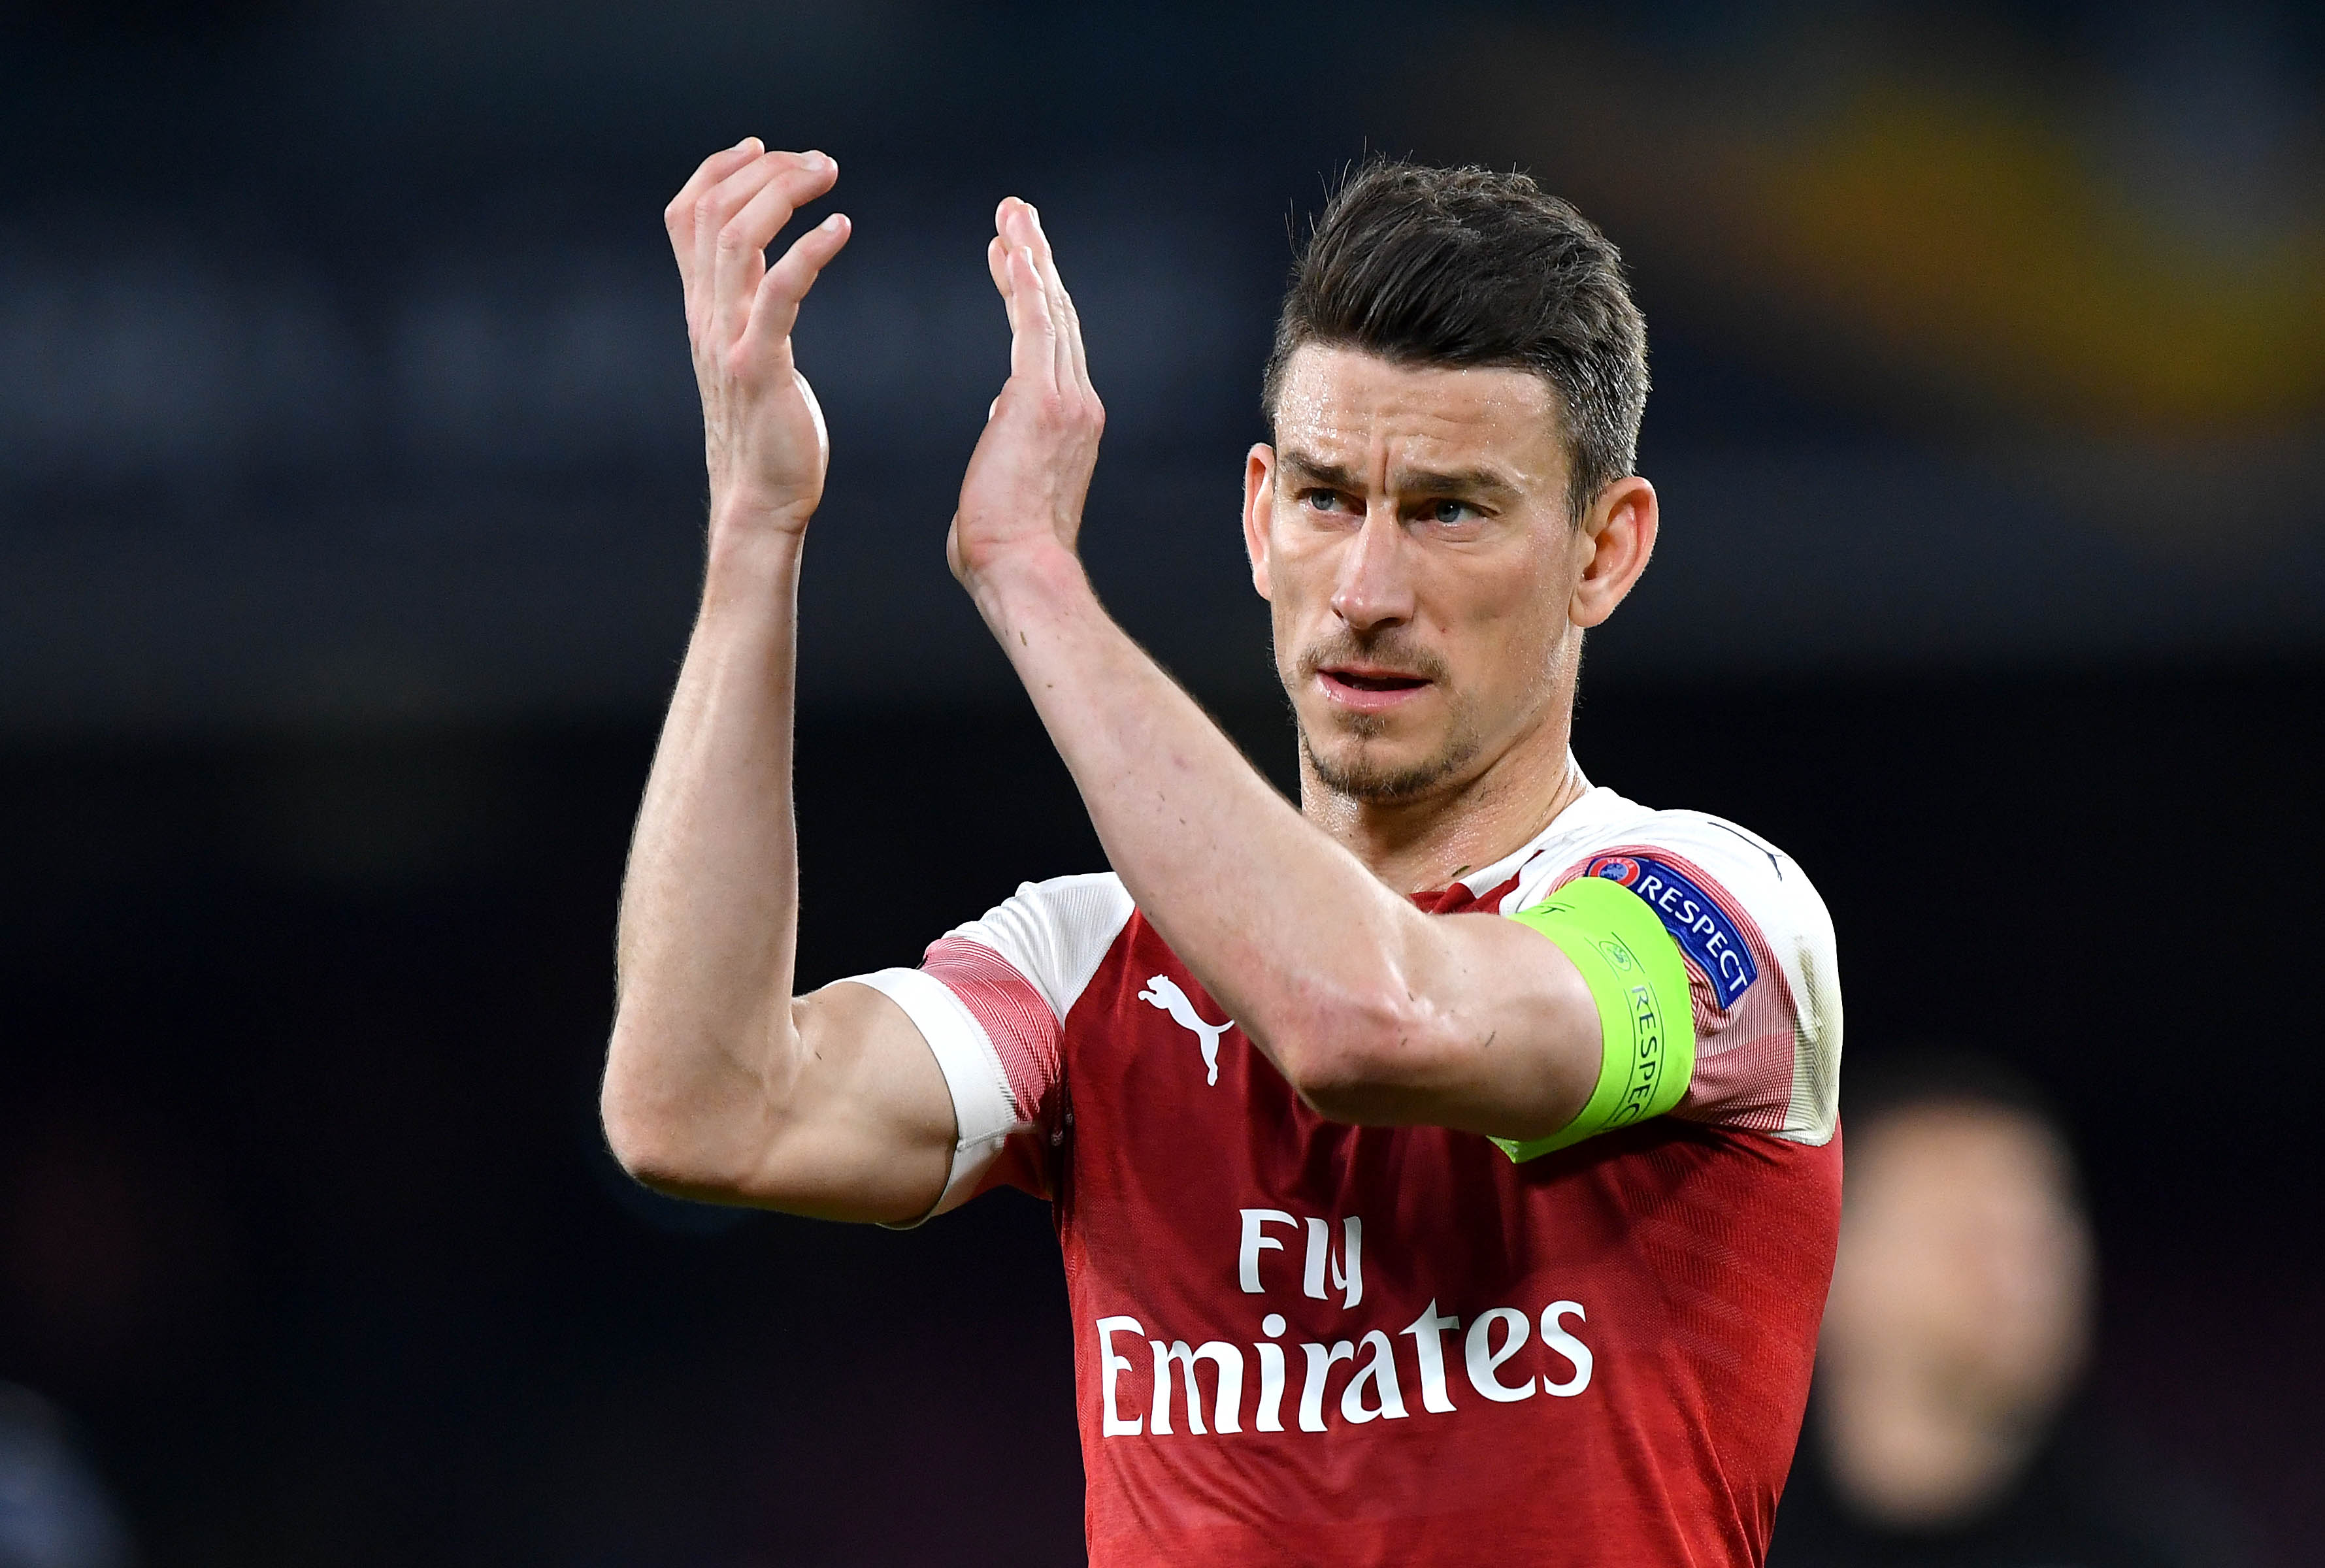 Koscielny is redifining age with his performances. (Photo courtesy: AFP/Getty)